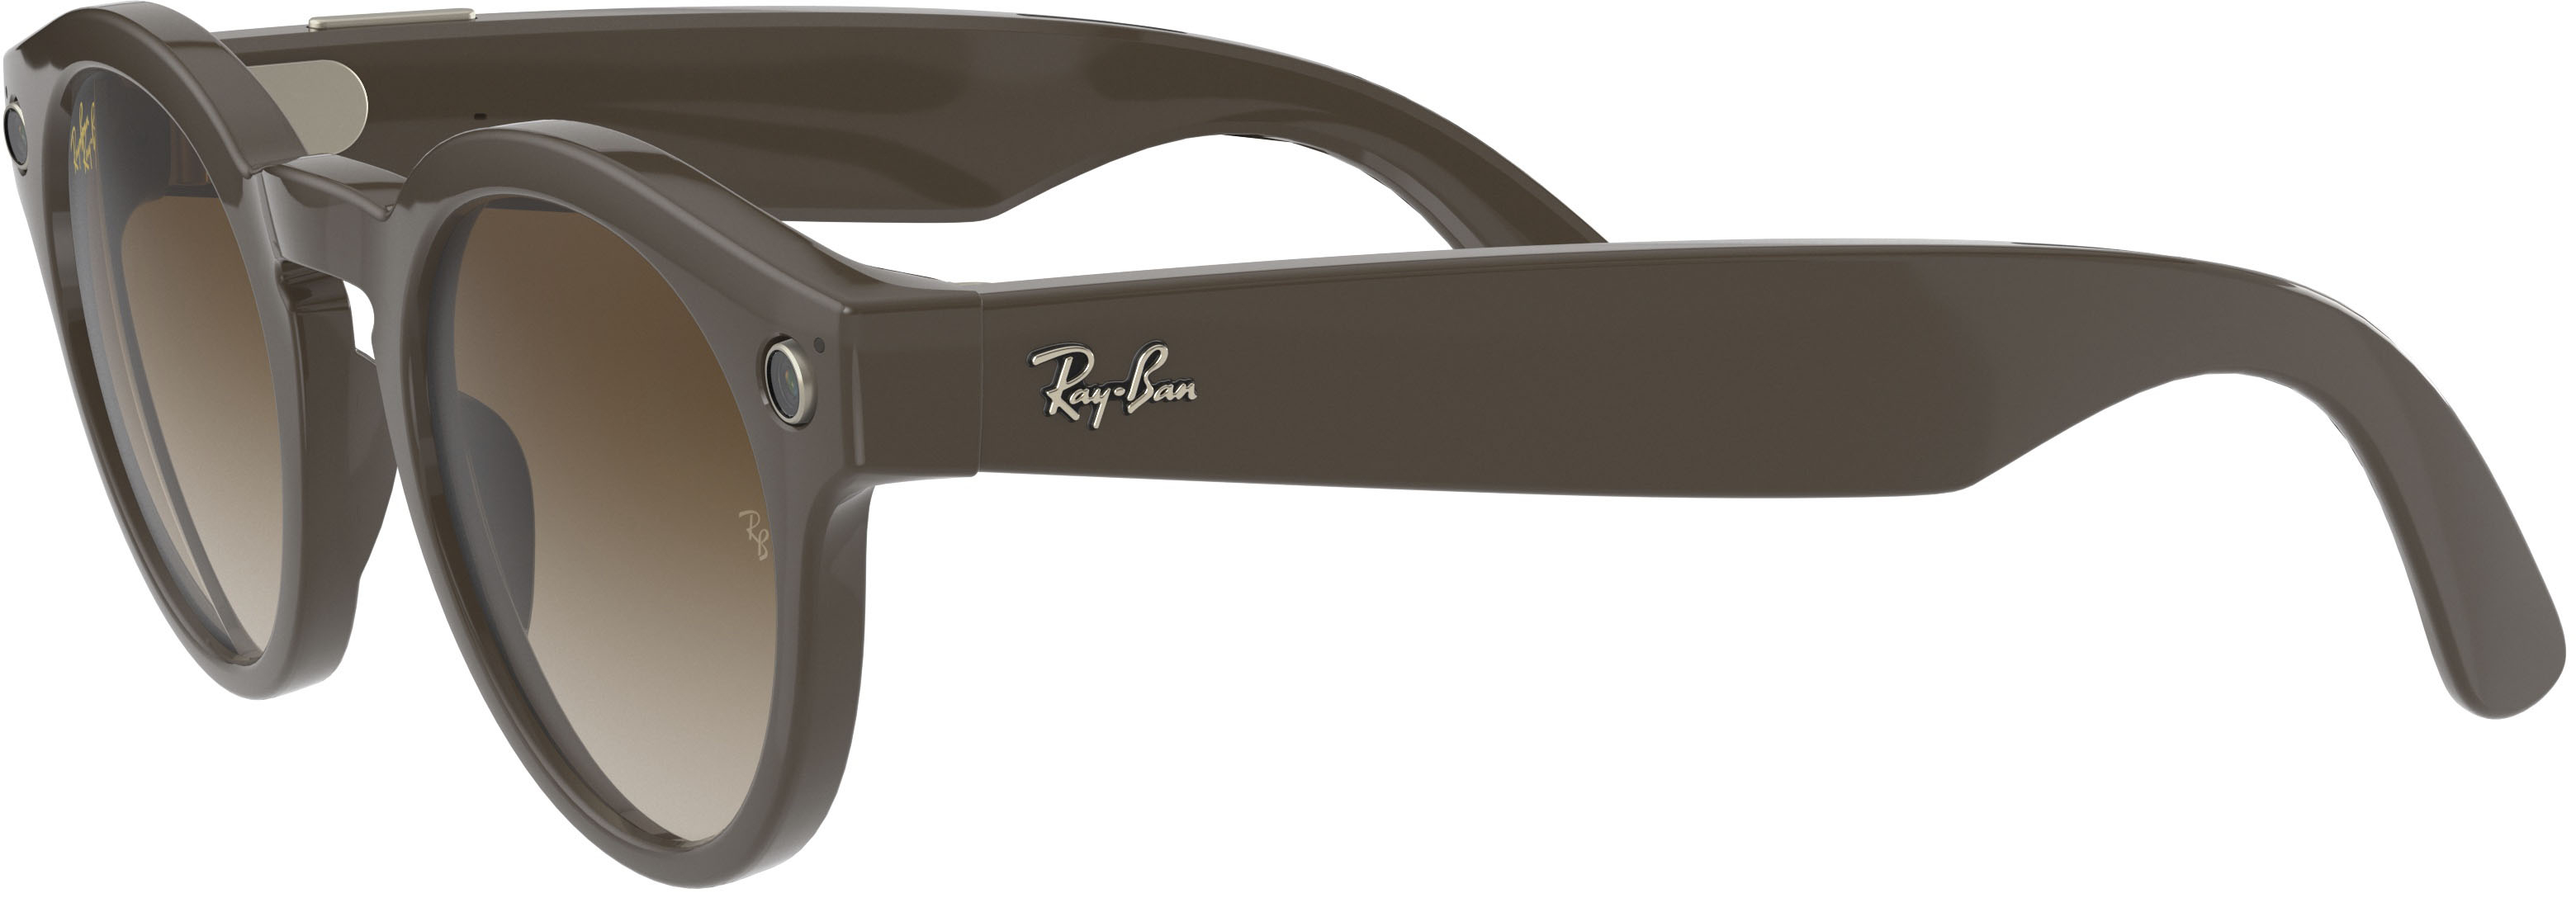 Left View: Ray-Ban - Stories Round Smart Glasses - Shiny Brown/Brown Gradient